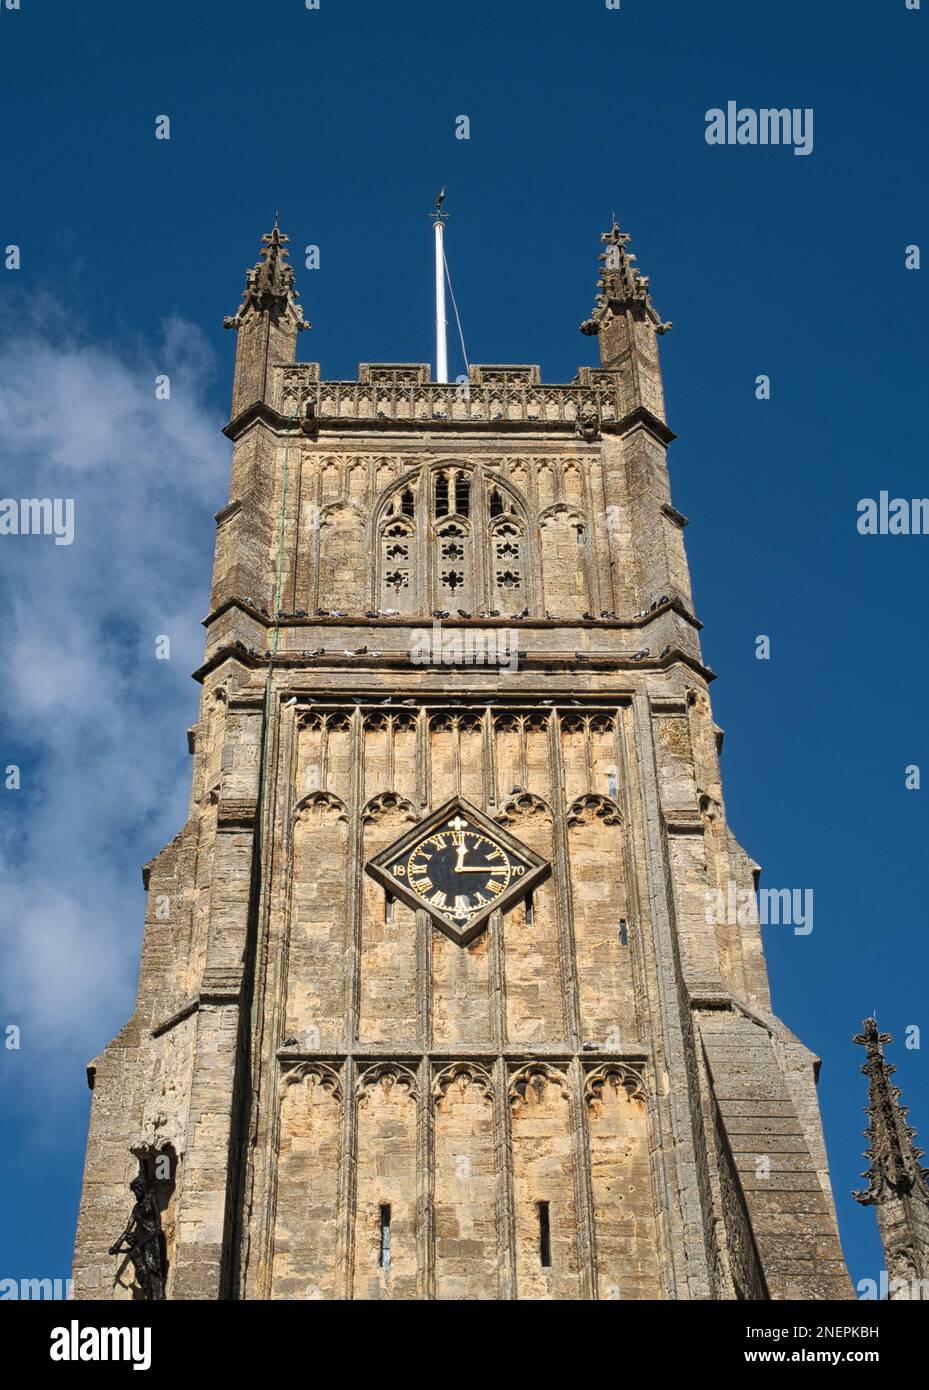 The tower of the Parish Church of St. John the Baptist, Cirencester, Gloucestershire Stock Photo